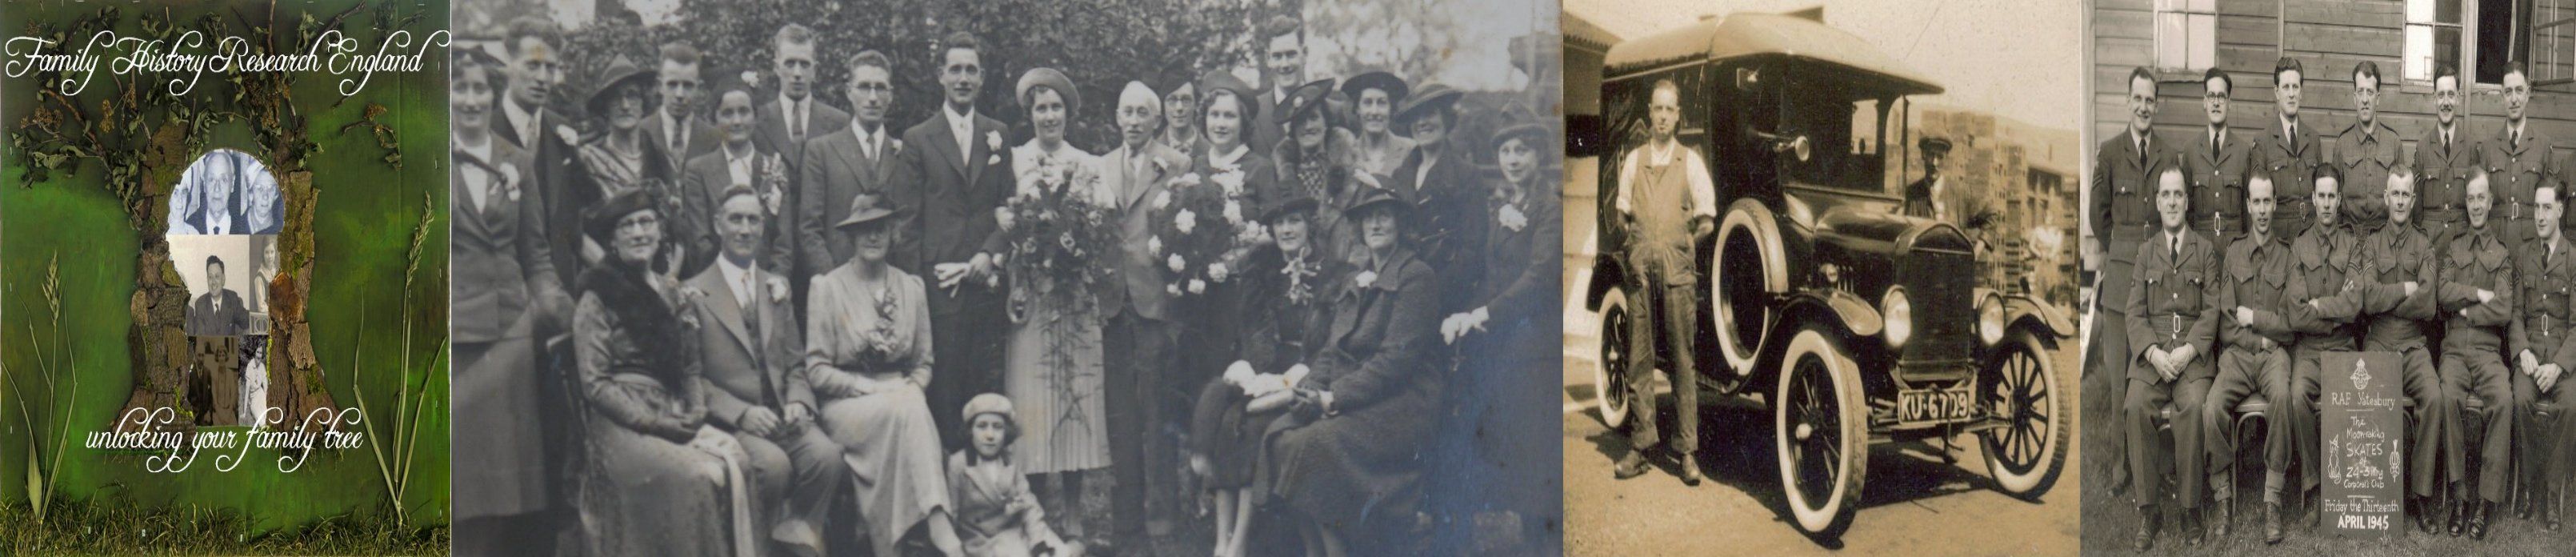 Genealogy photographs for Family History Research England ©. 